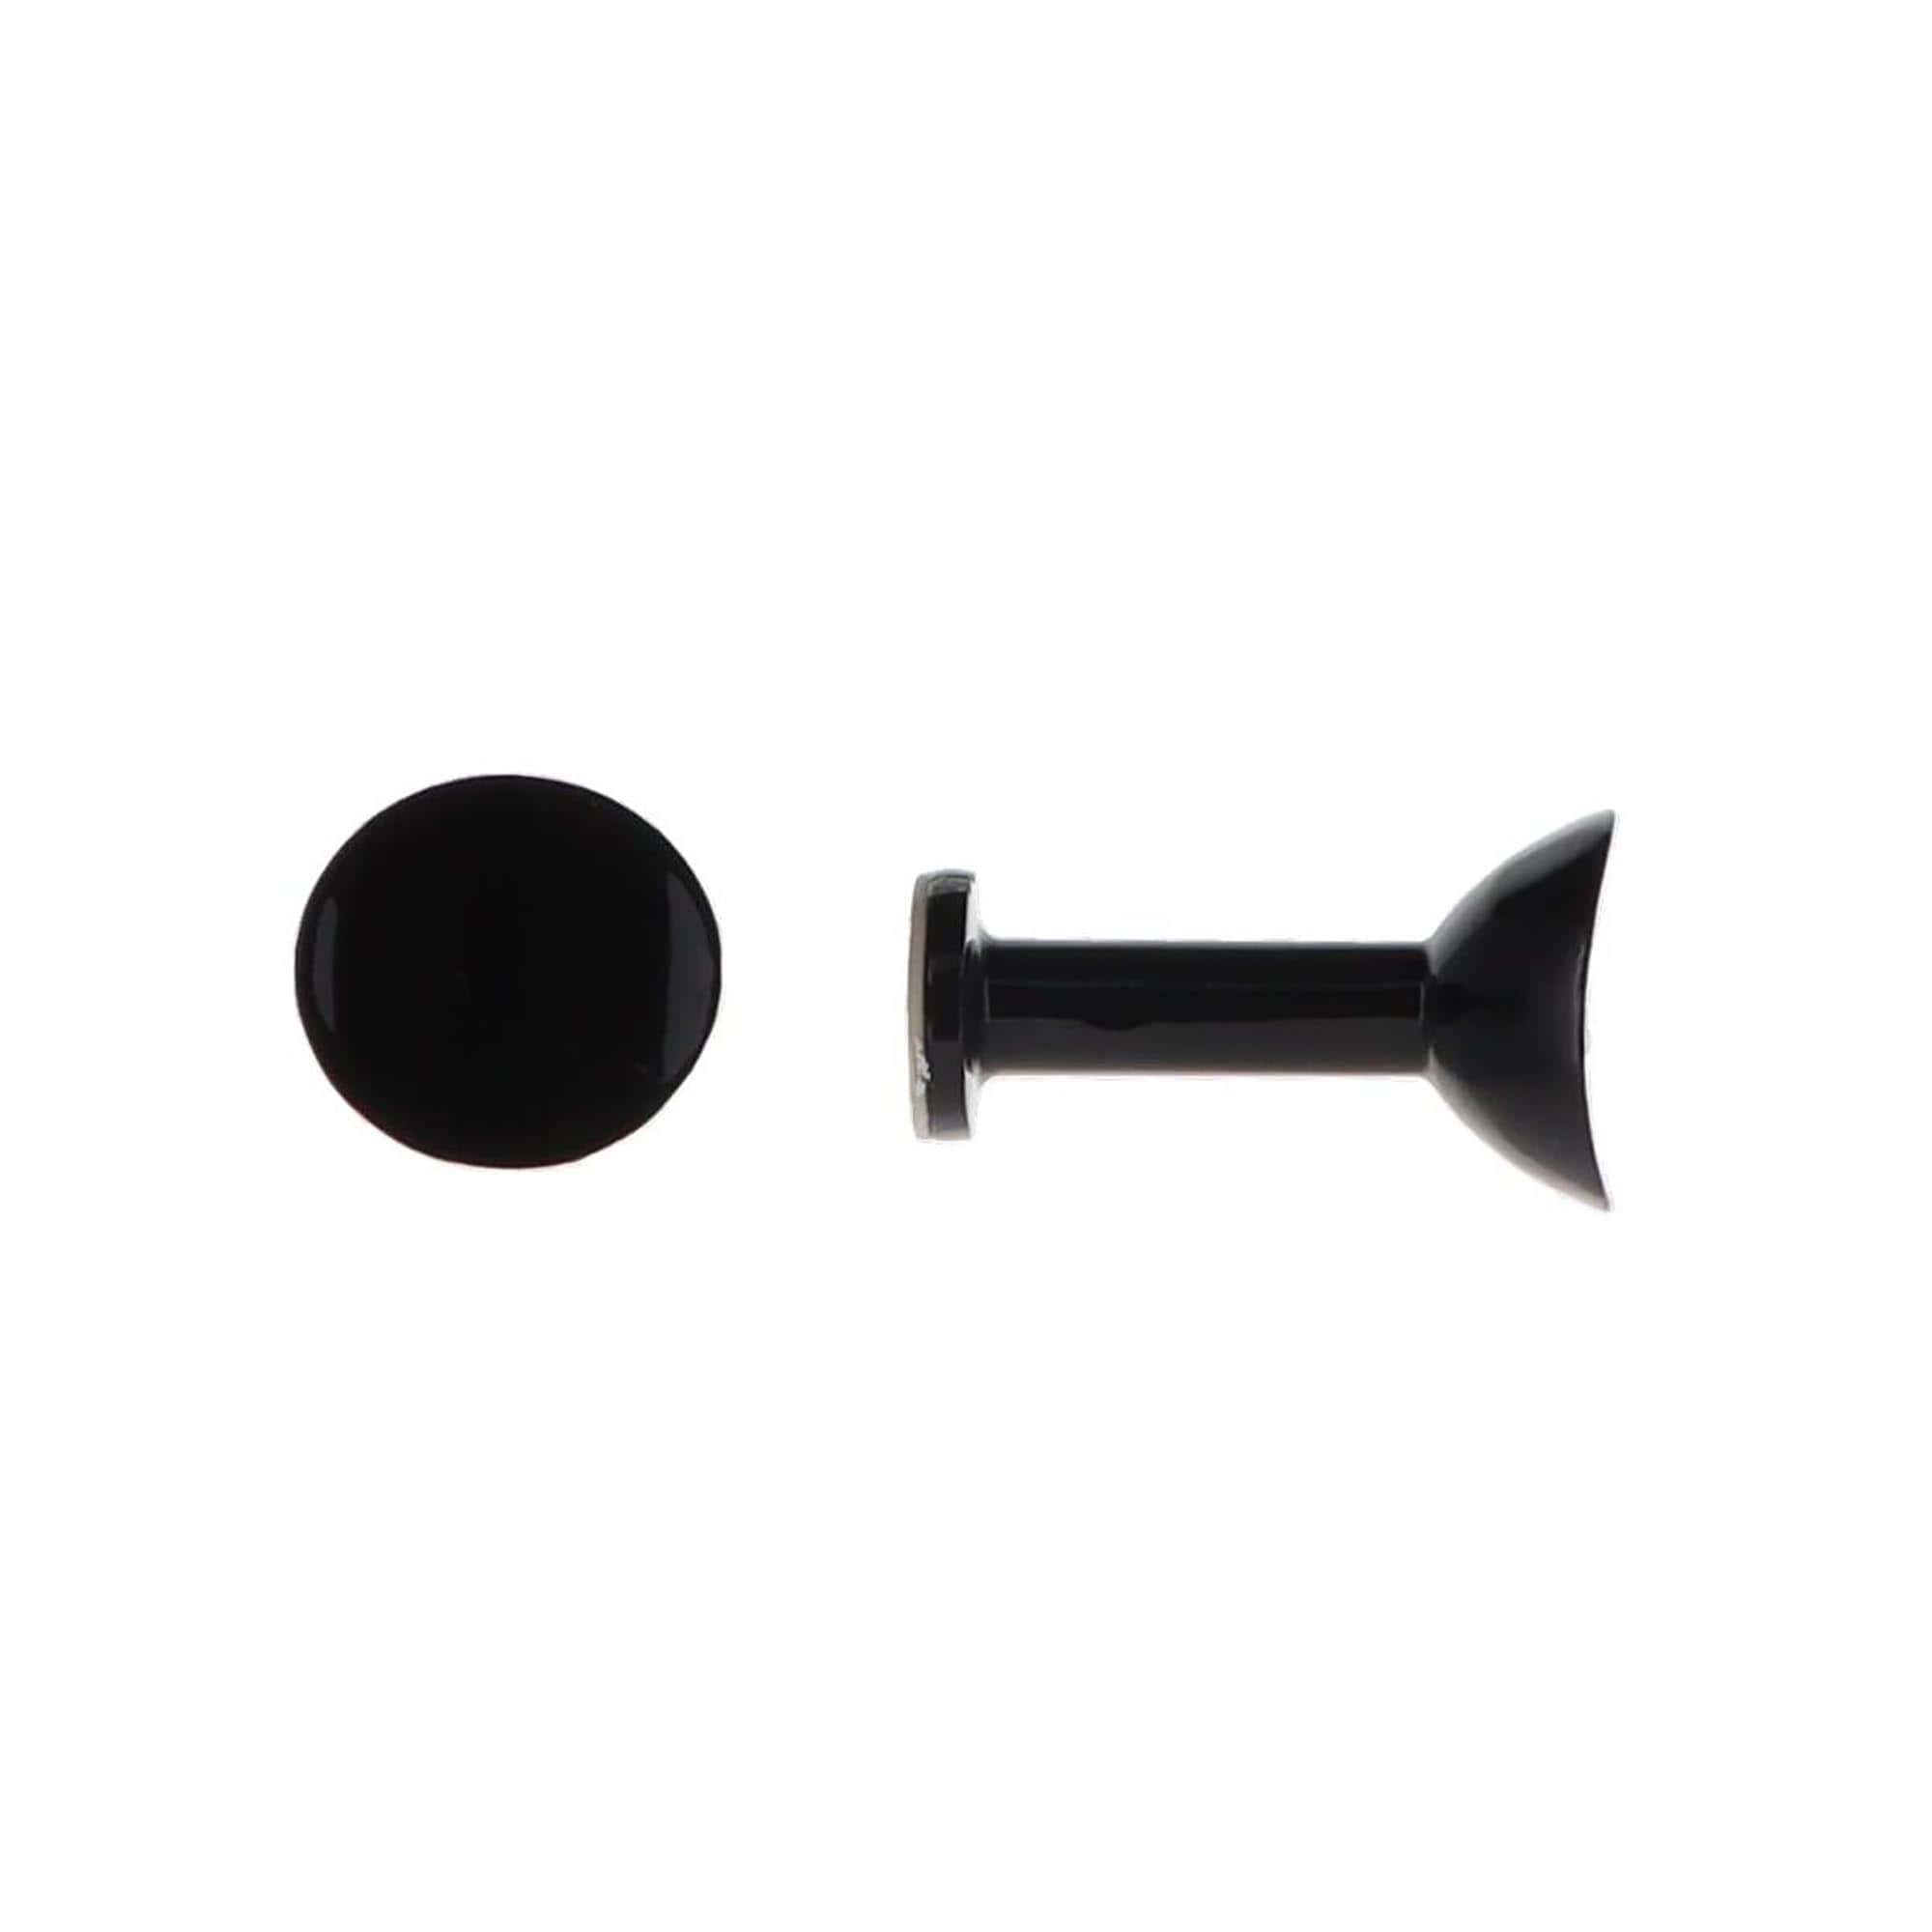 pair of metal hooks for curtain holdbacks in shiny black with round design